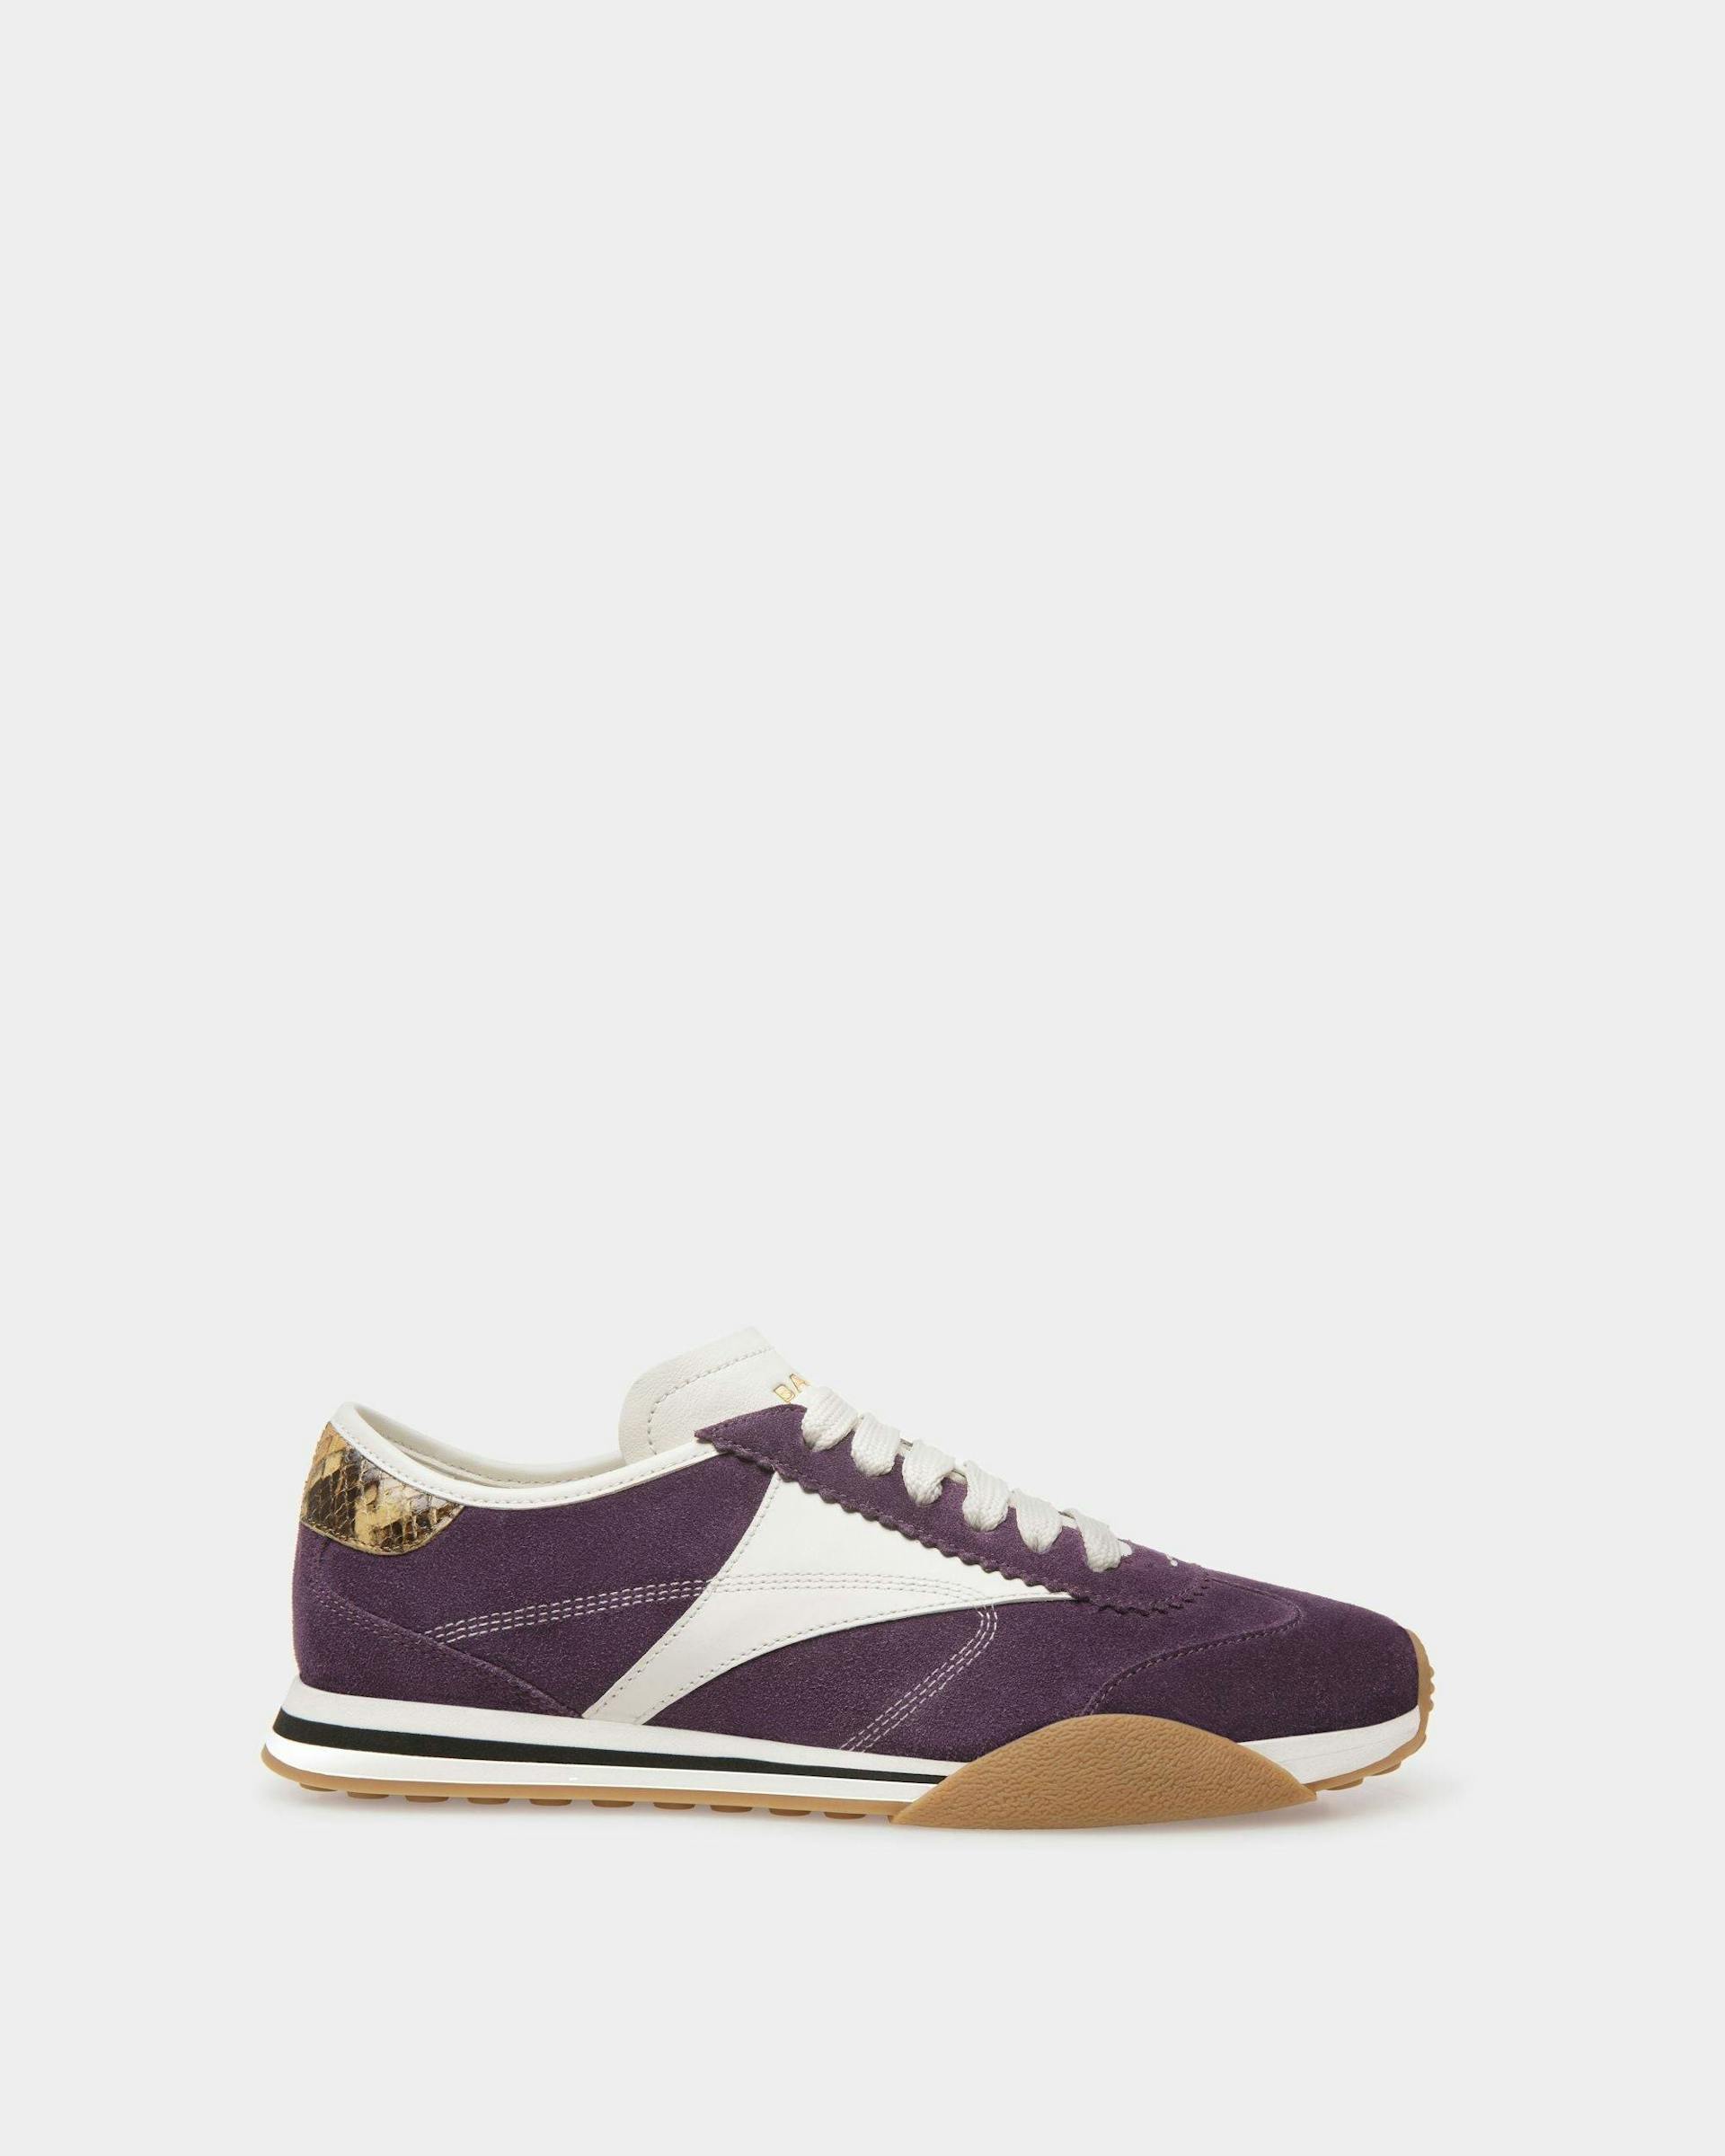 Sussex Sneakers - Bally